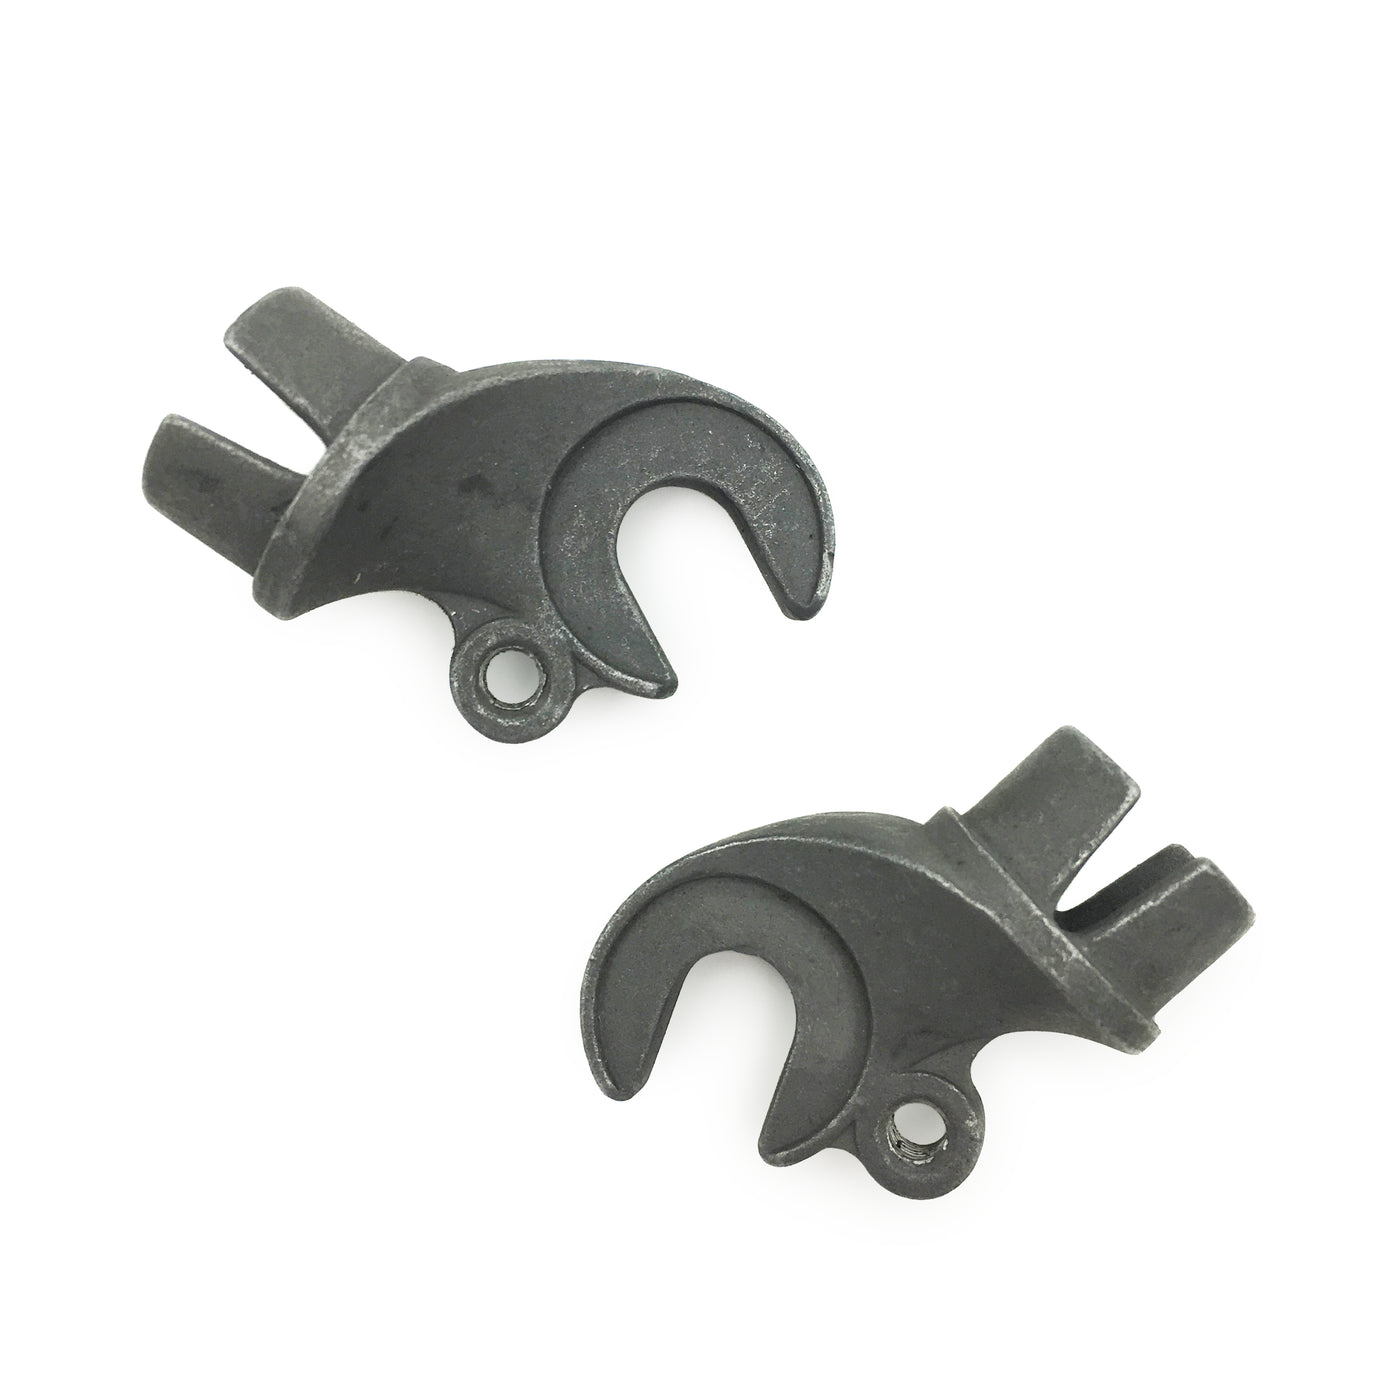 Front dropouts - 20mm plug style - offset with one eyelet. Pair